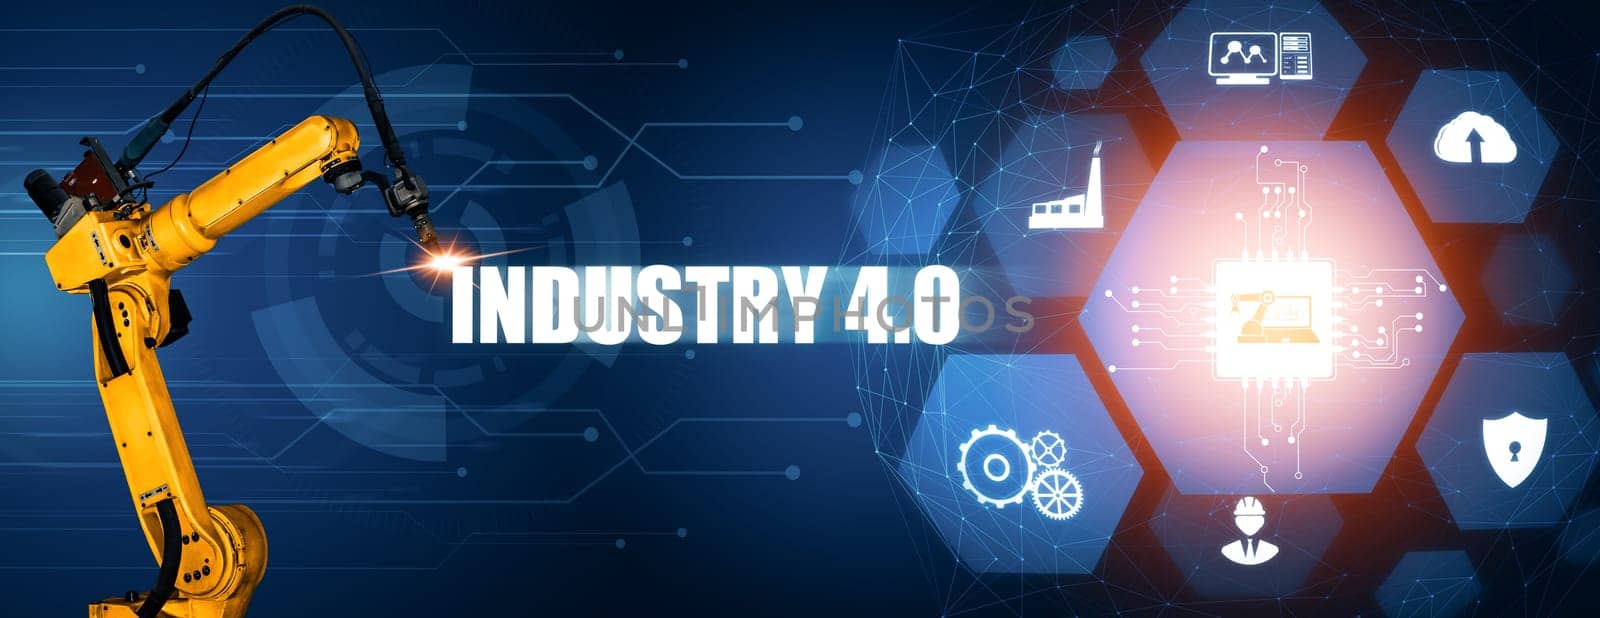 XAI Smart industry robot arms for digital factory production technology showing automation manufacturing process of the Industry 4.0 or 4th industrial revolution and IOT software to control operation.